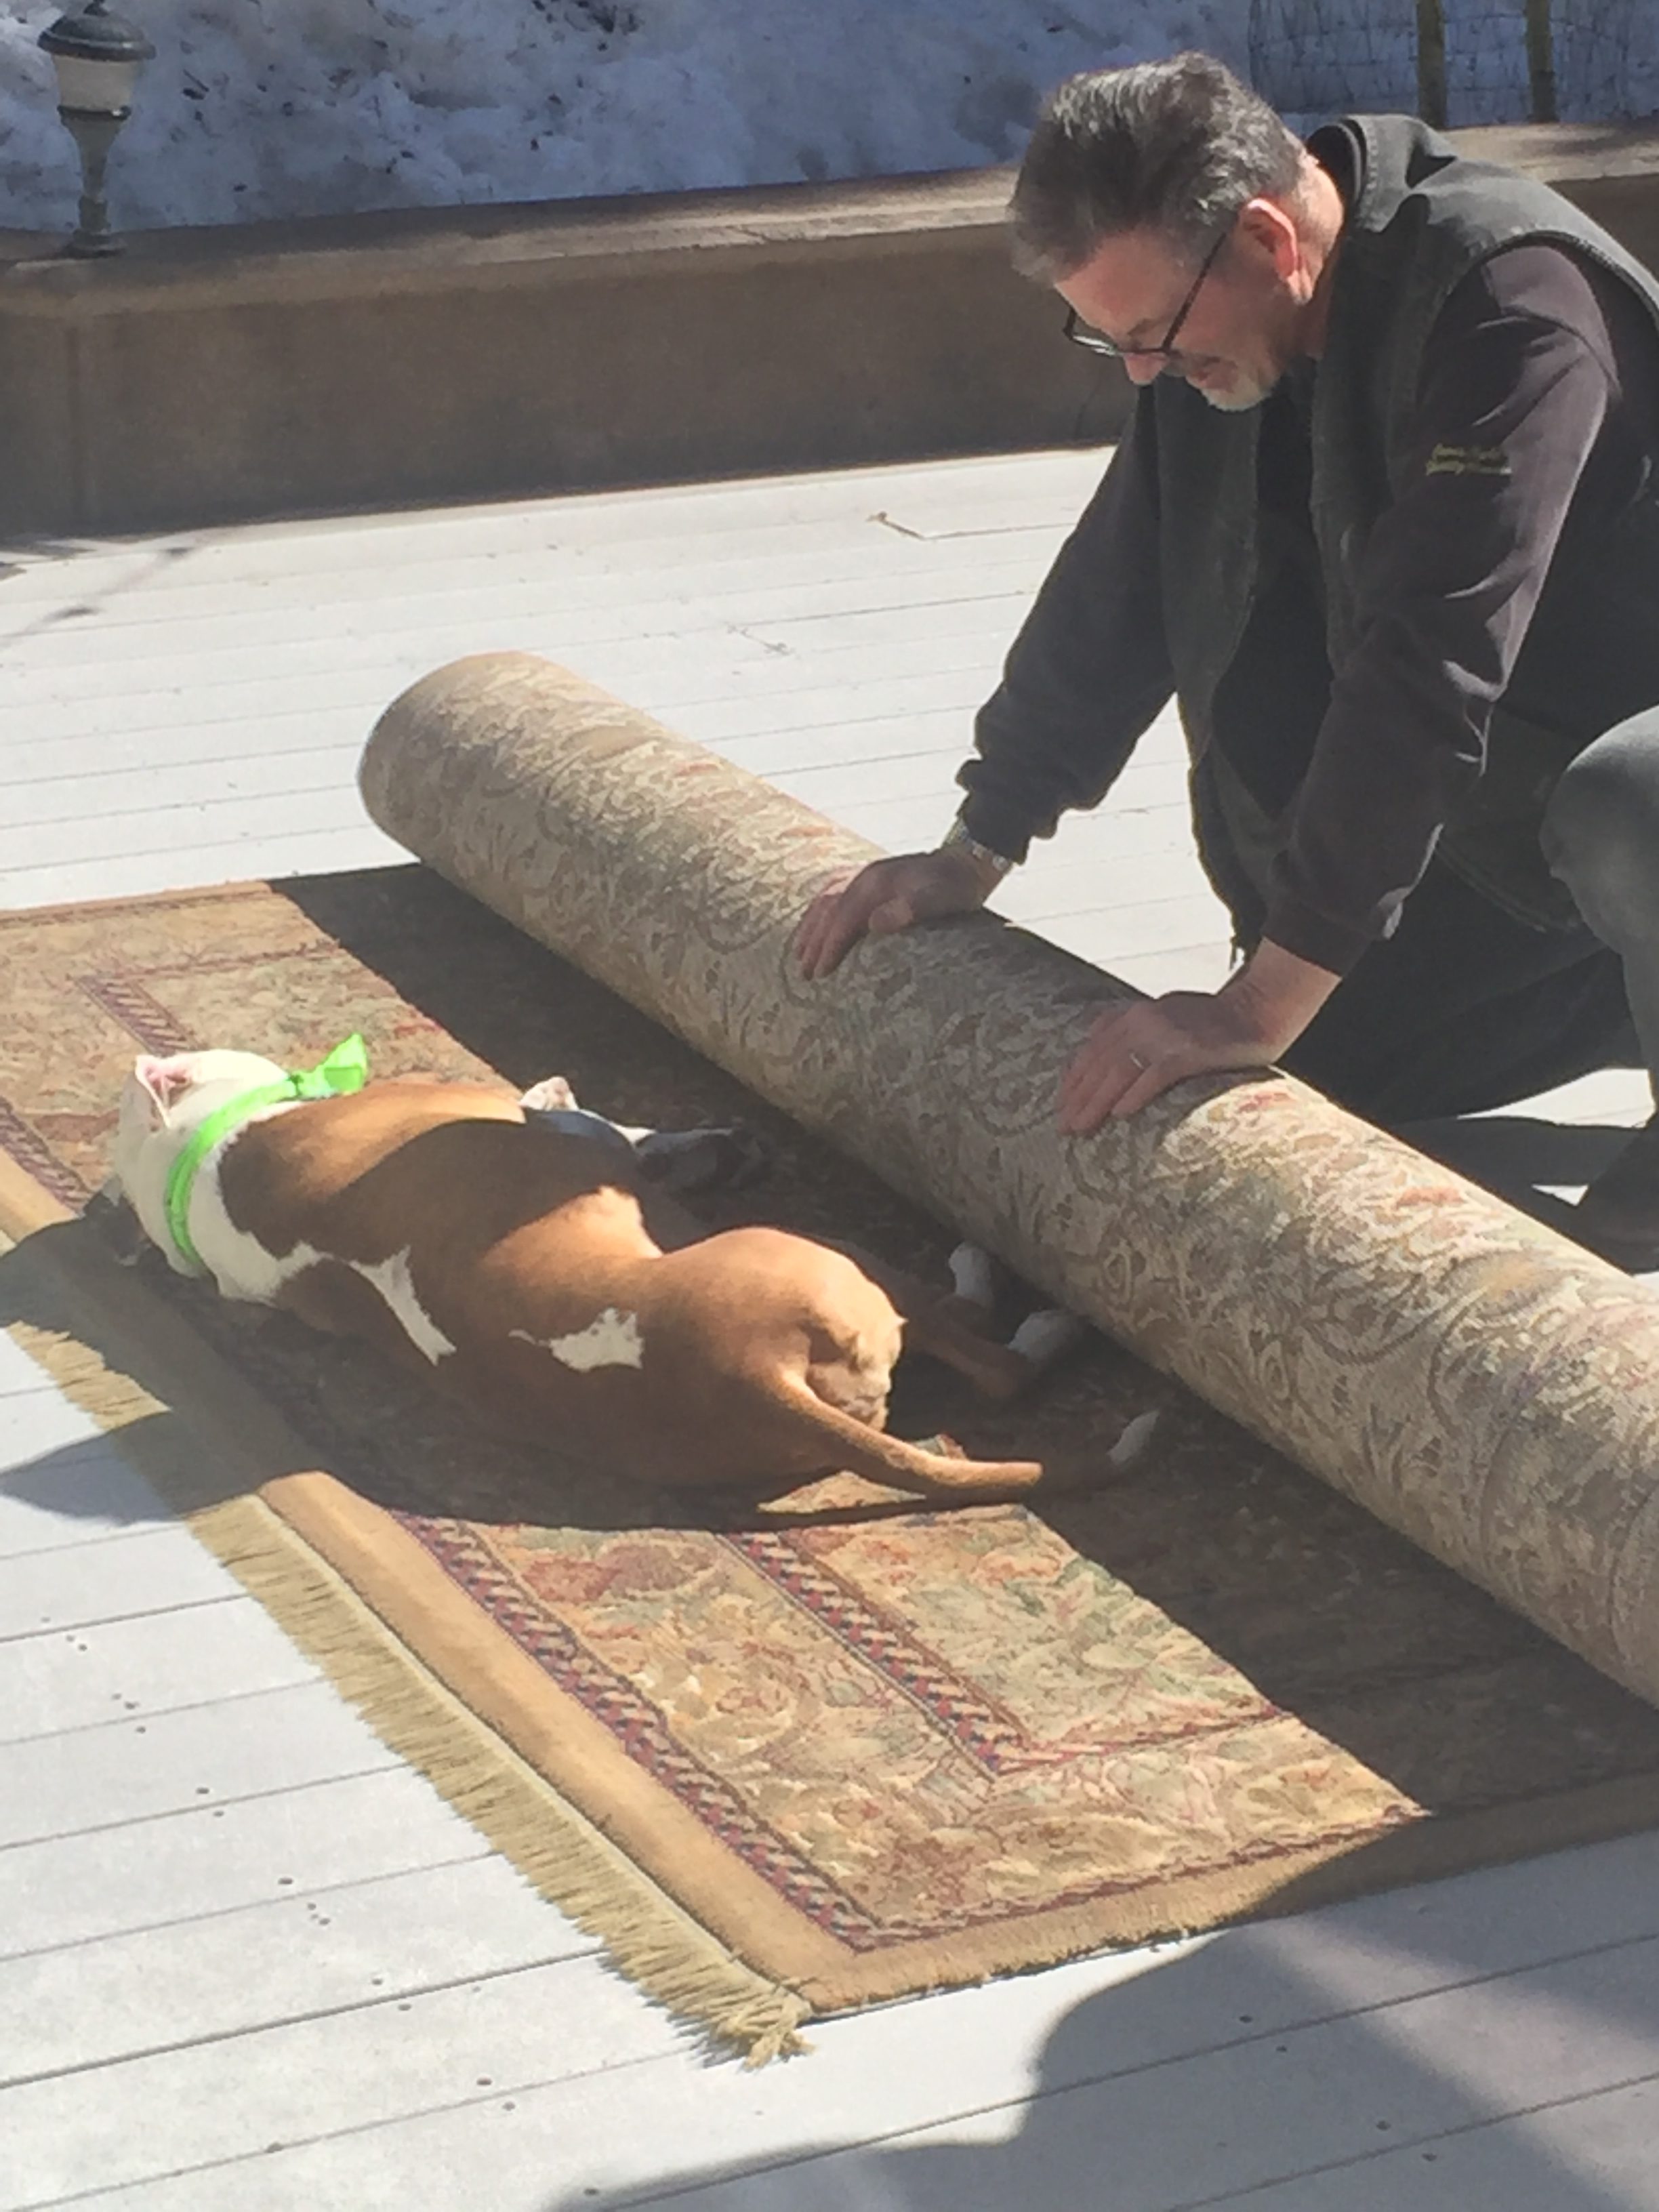 A brown and white sleeping dog lays on a rug while his owner tries to roll it up